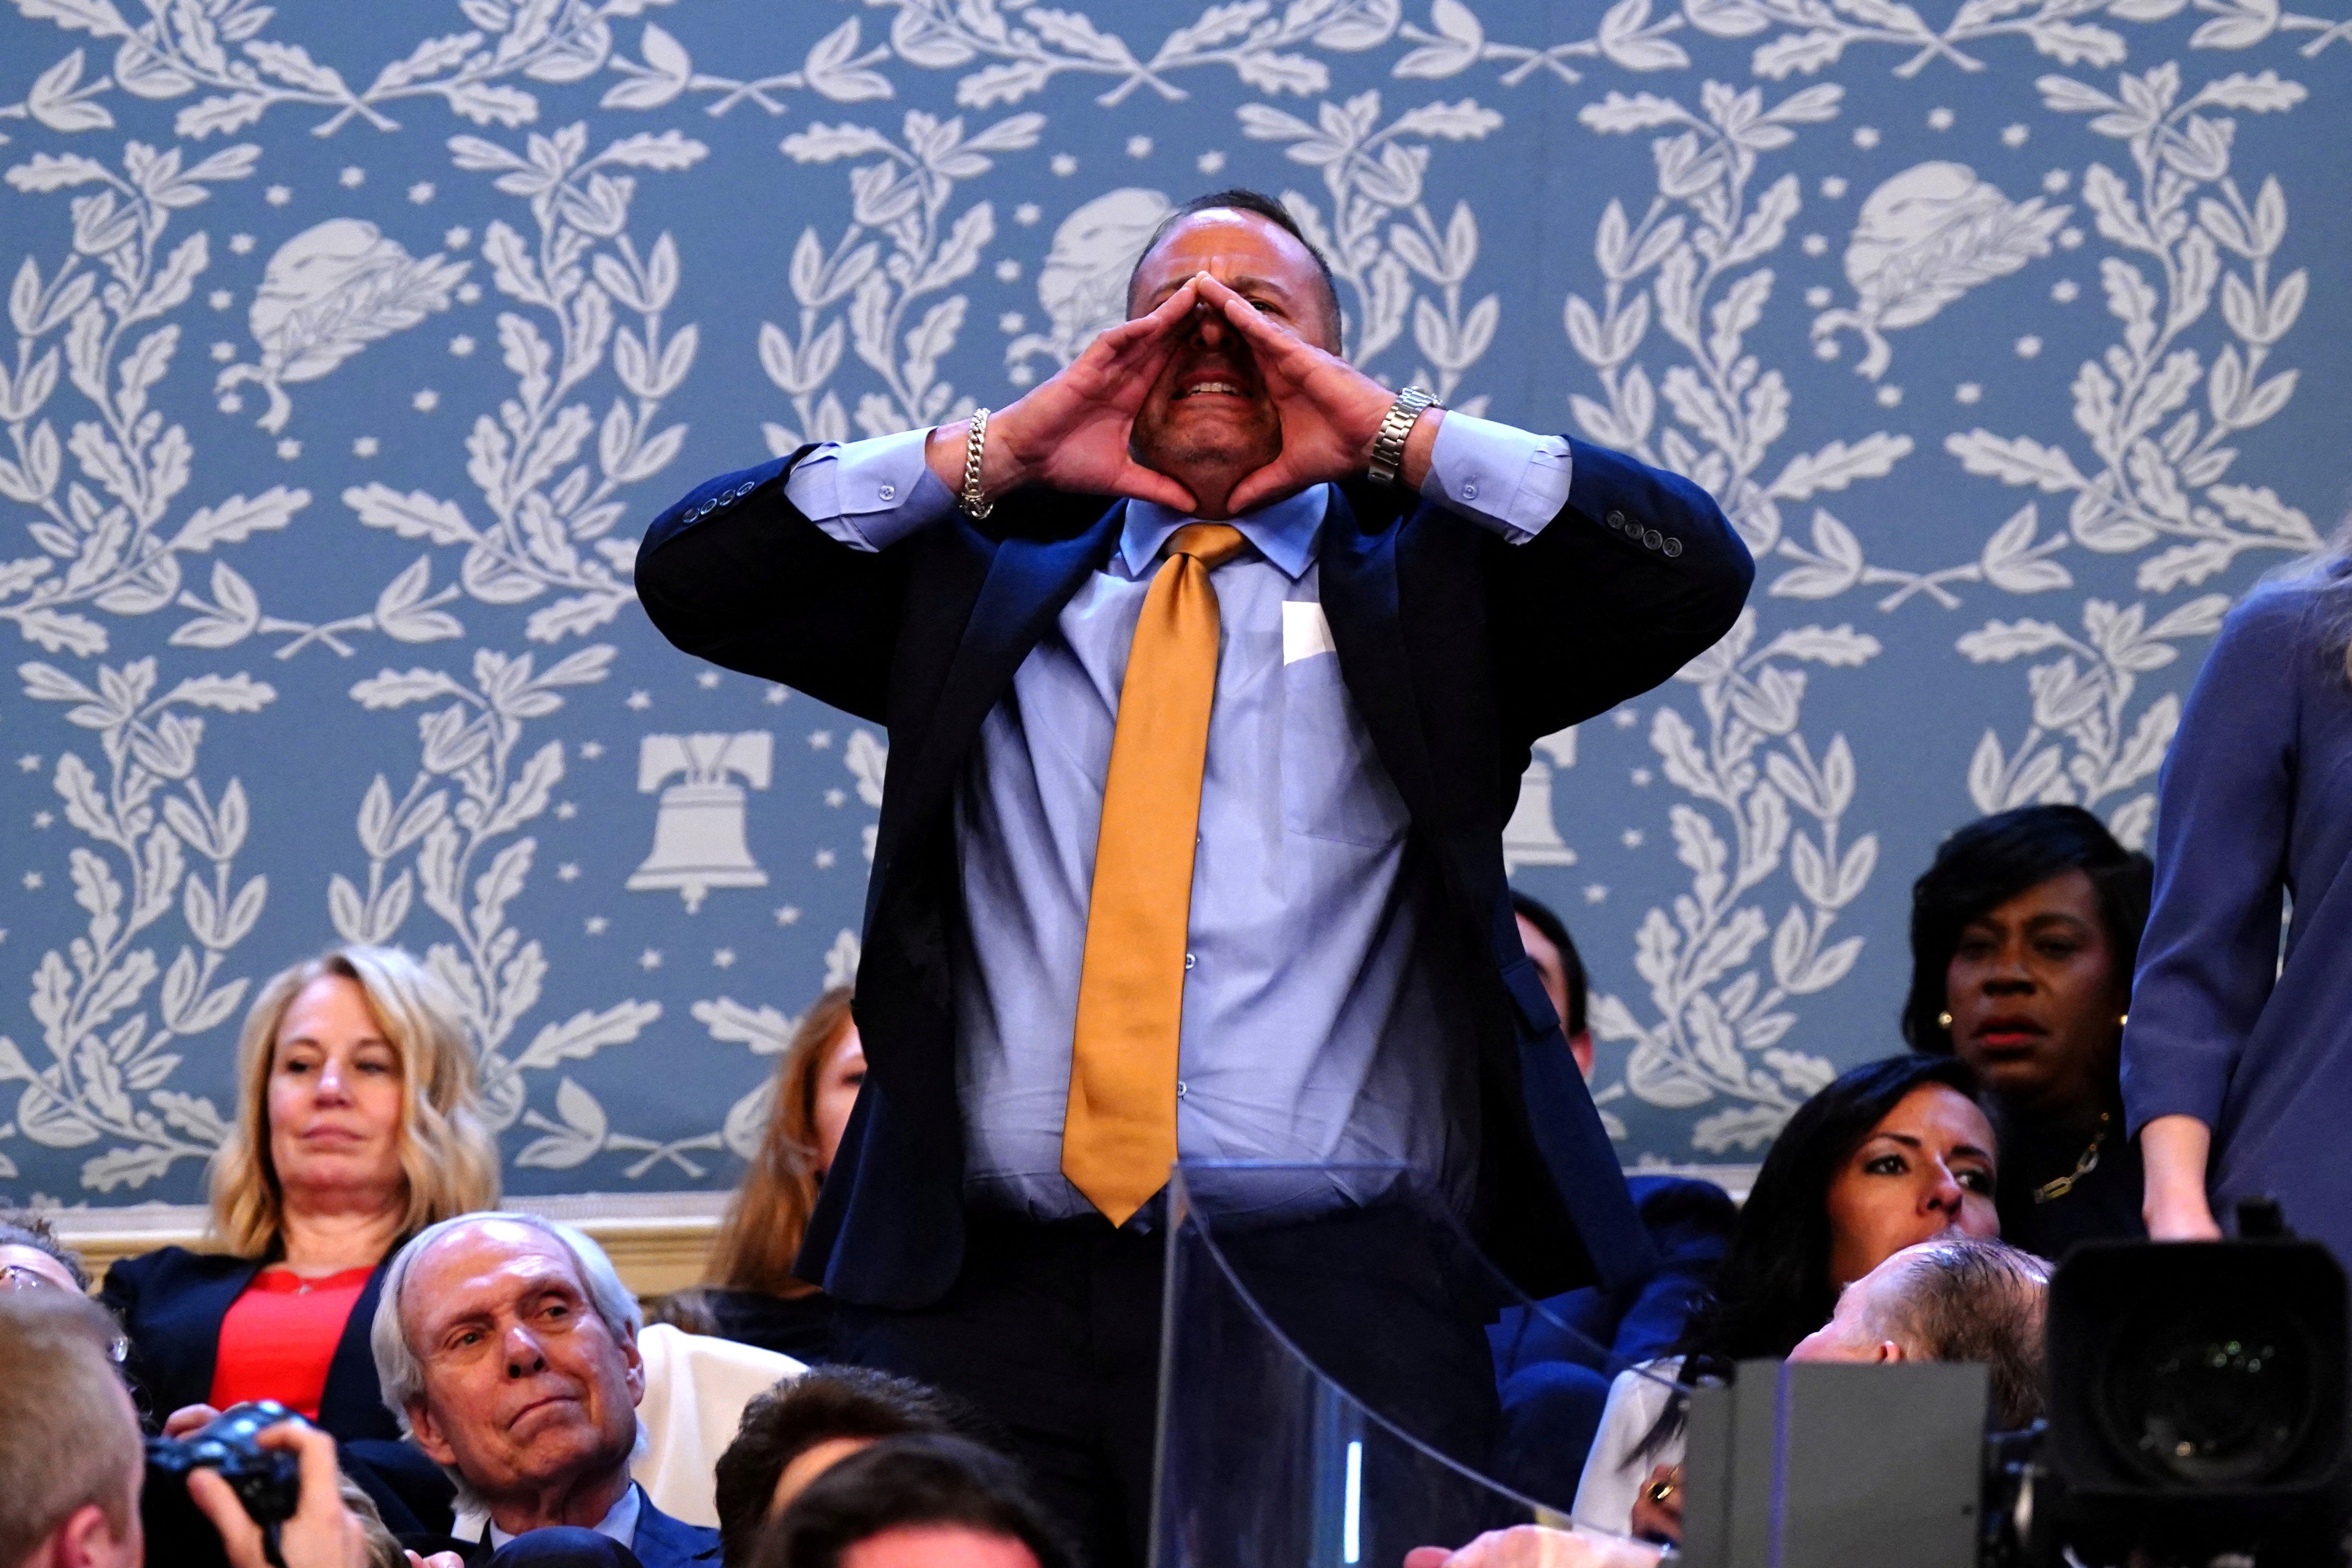 A protester shouts at President Joe Biden as he delivers his third State of the Union address